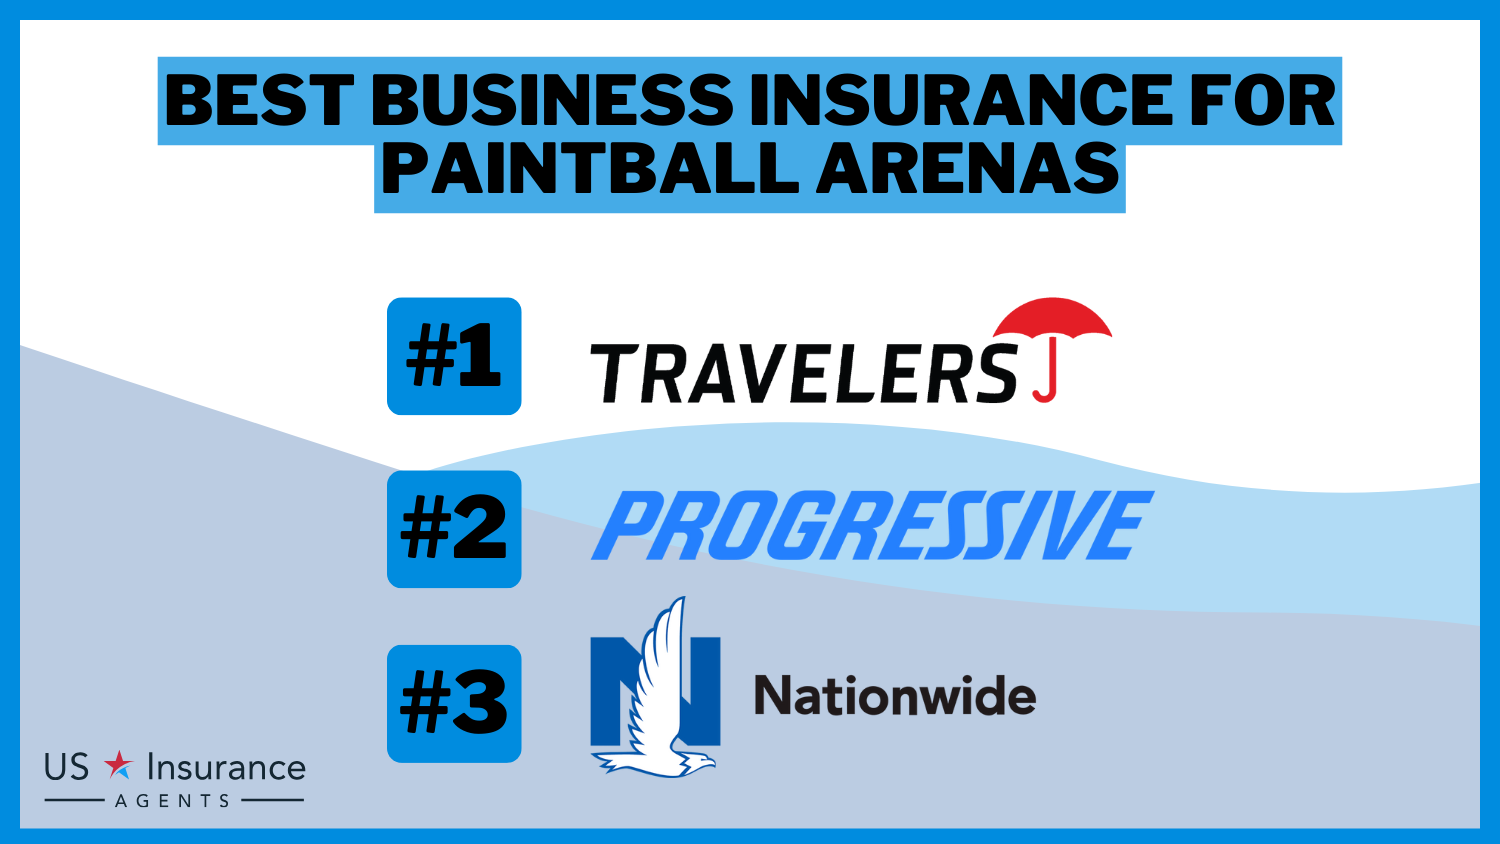 3 Best Business Insurance for Paintball Arenas: Travelers, Progressive and Nationwide.